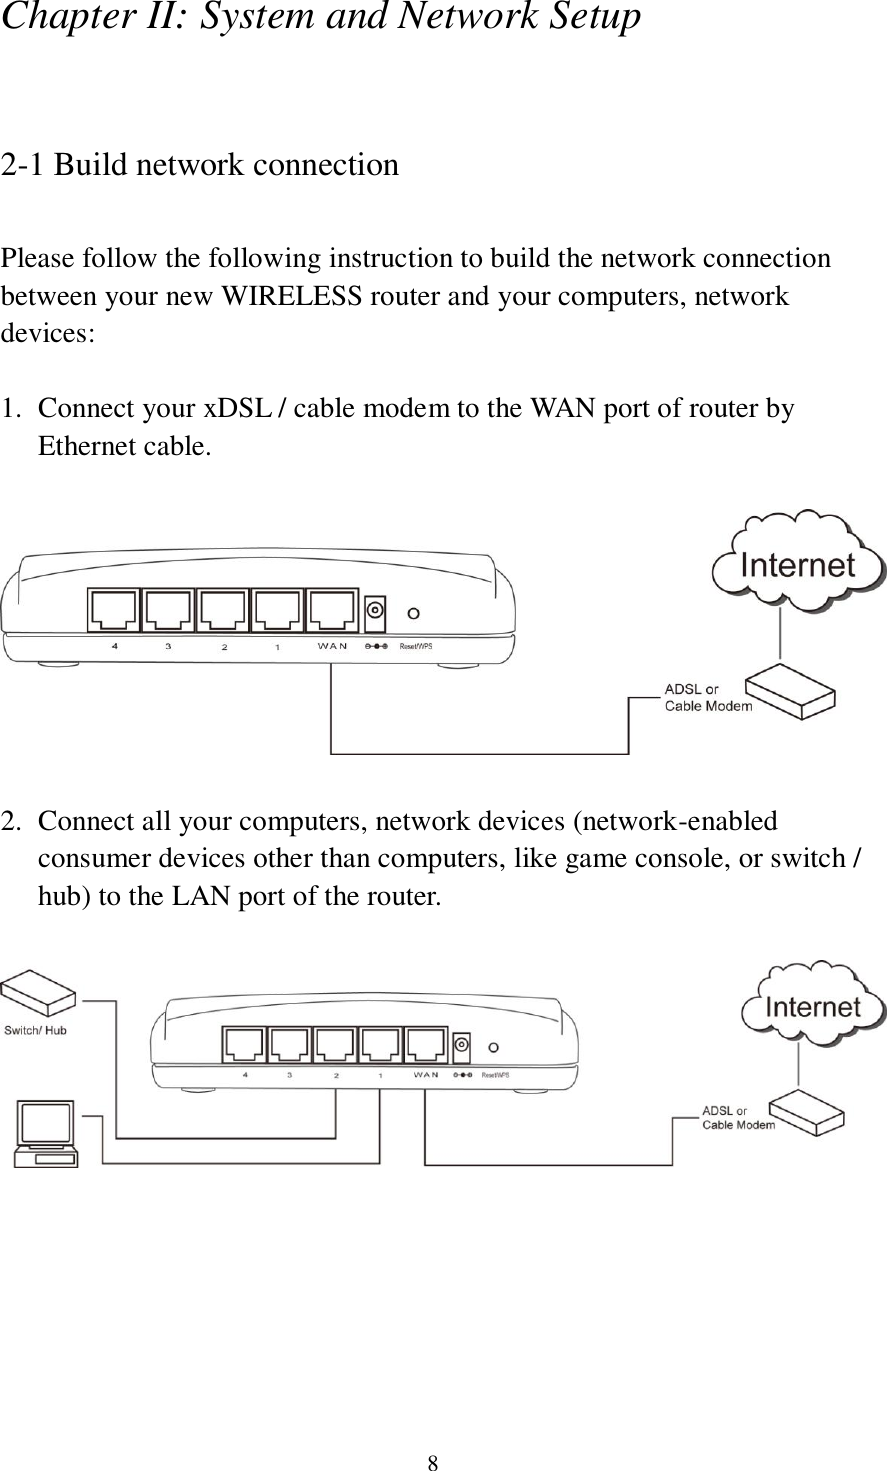 8 Chapter II: System and Network Setup  2-1 Build network connection  Please follow the following instruction to build the network connection between your new WIRELESS router and your computers, network devices:  1. Connect your xDSL / cable modem to the WAN port of router by Ethernet cable.      2. Connect all your computers, network devices (network-enabled consumer devices other than computers, like game console, or switch / hub) to the LAN port of the router.         